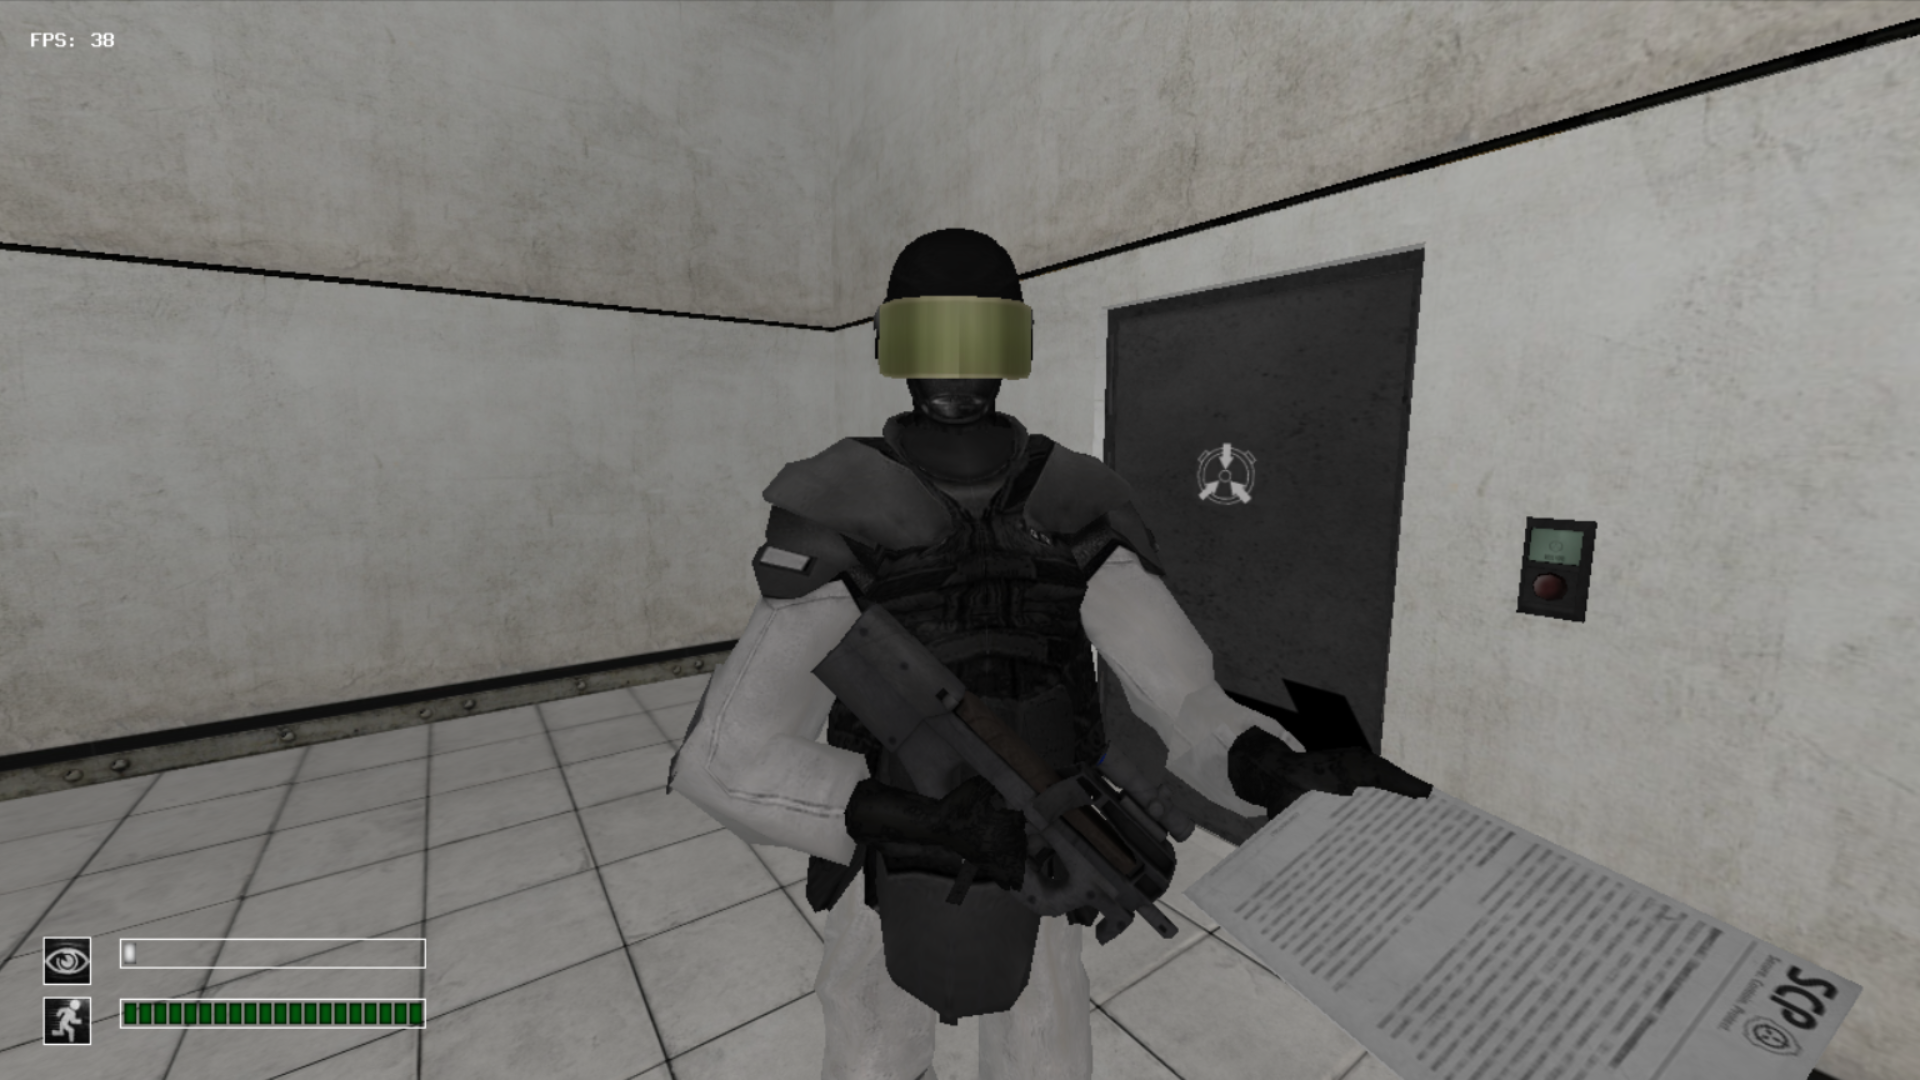 SCP Foundation Suit  Thunderstore - The Lethal Company Mod Database